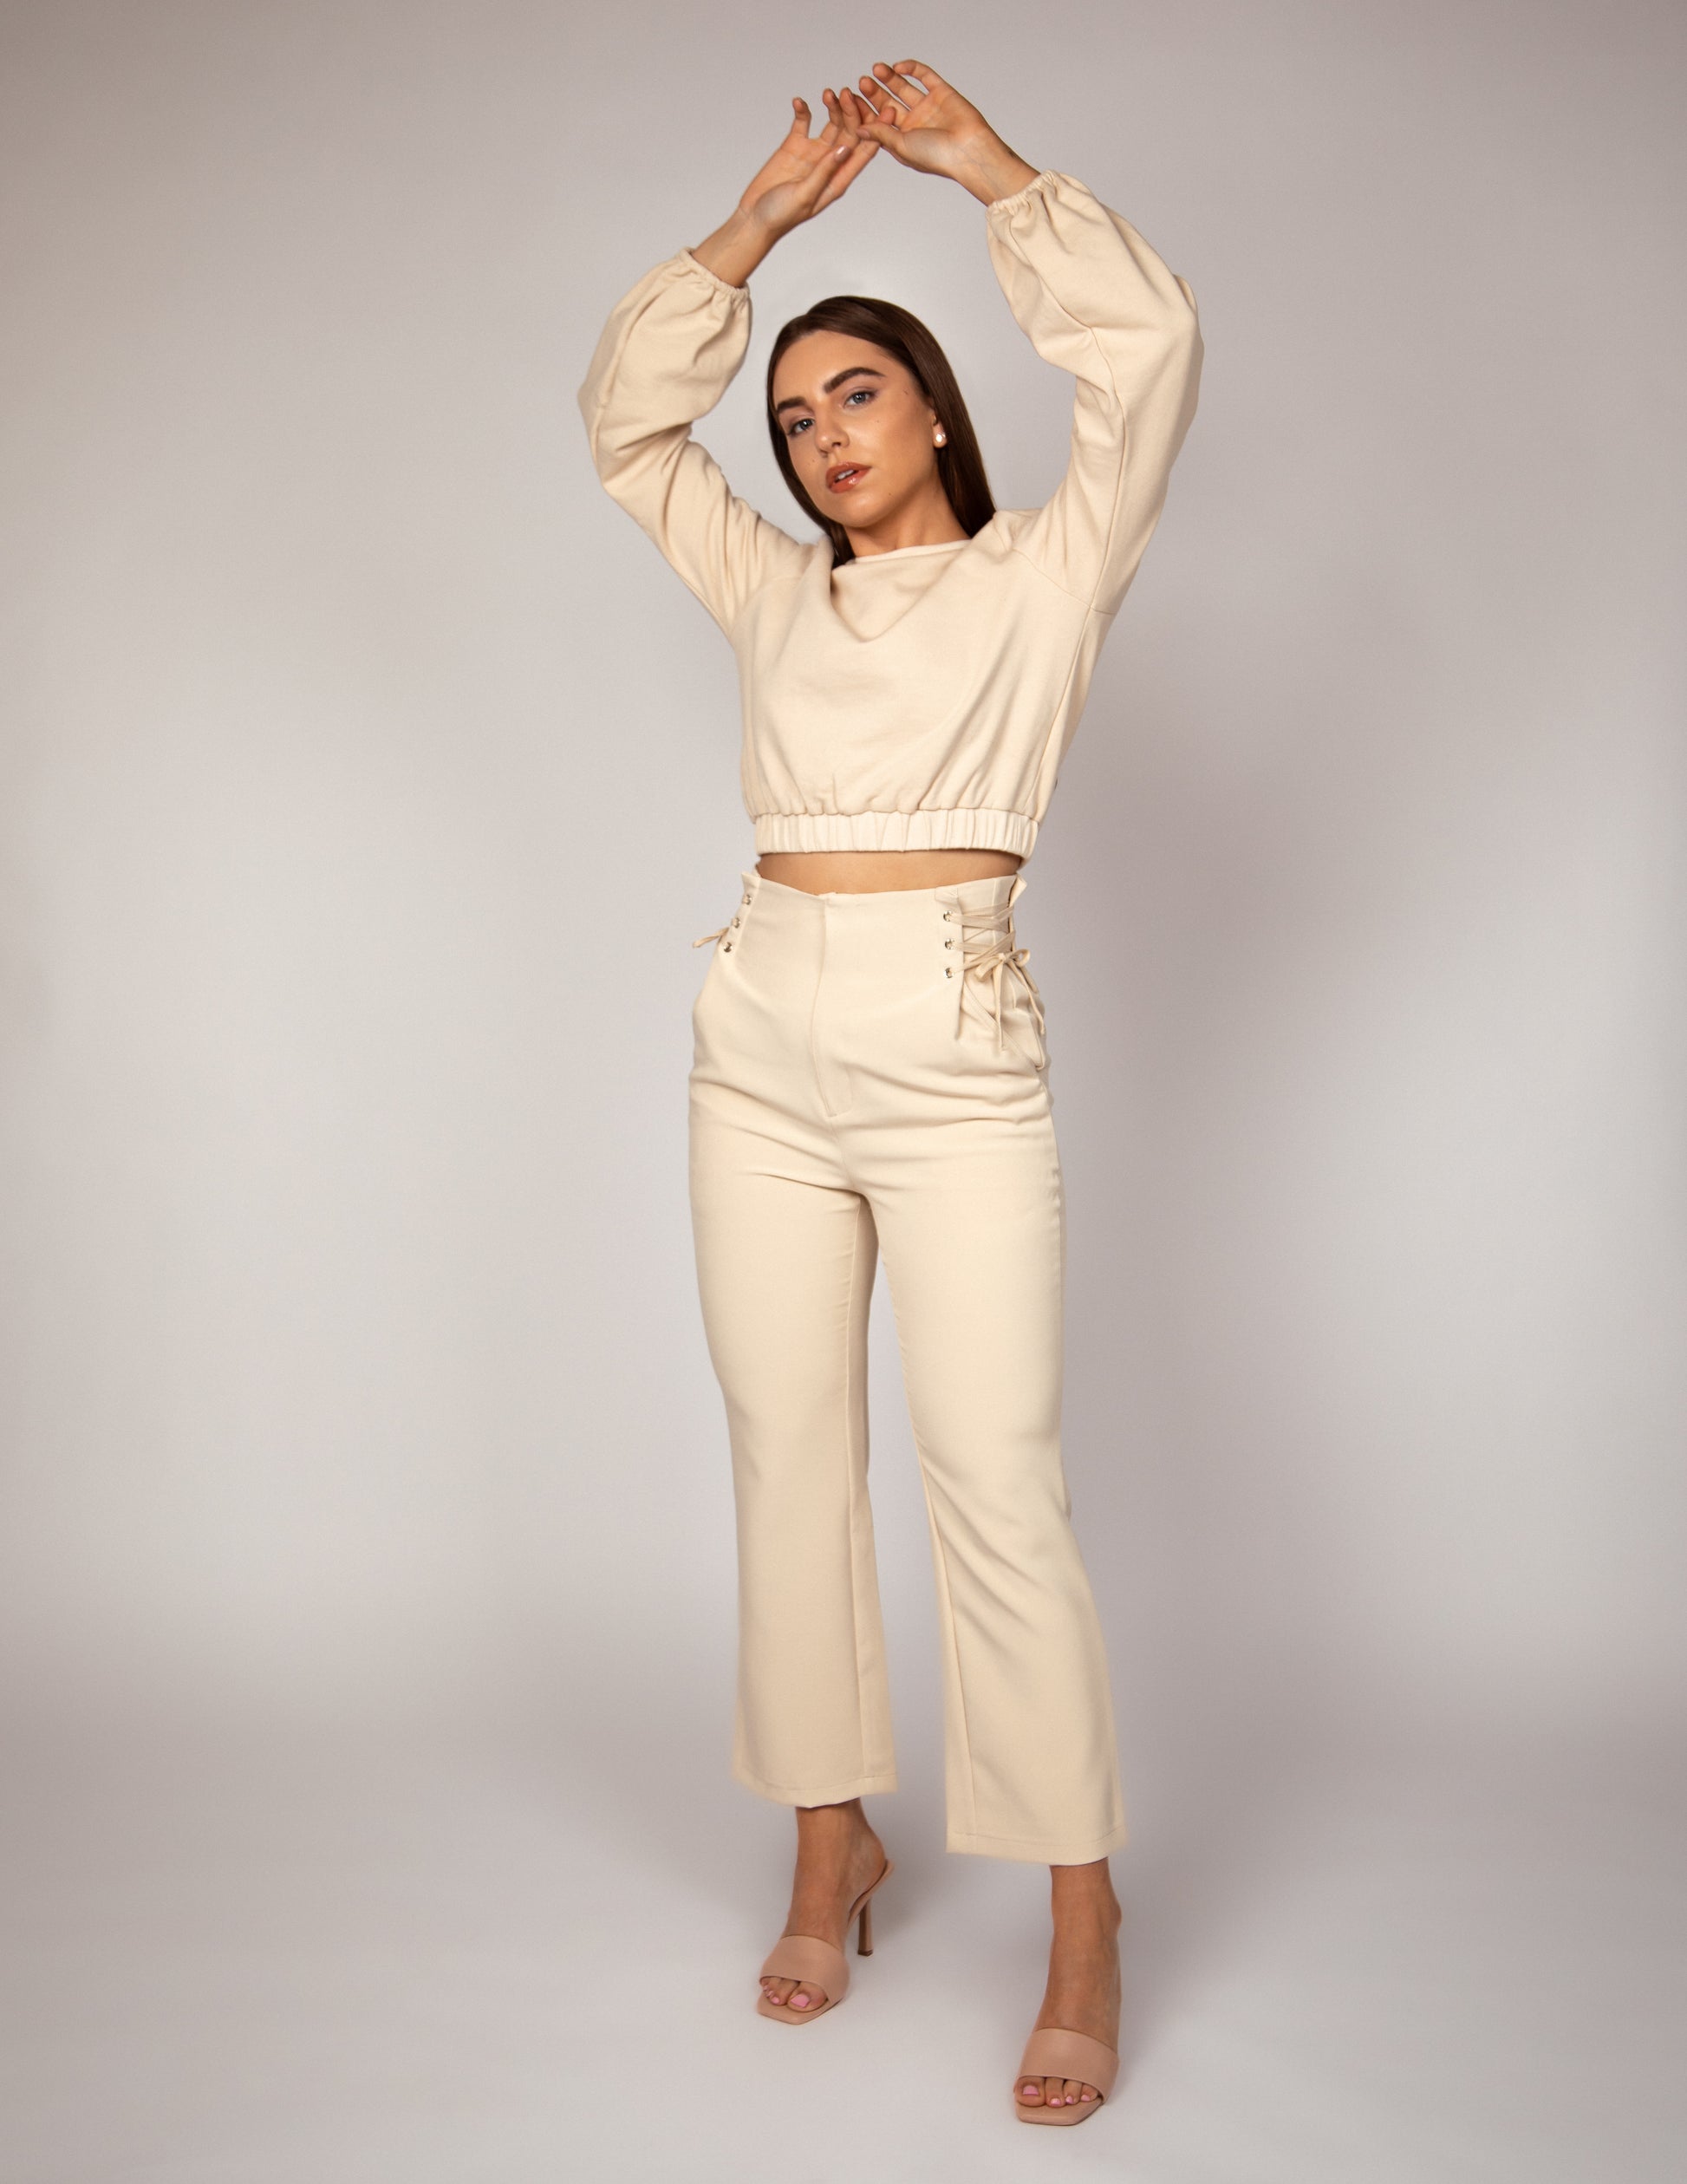 Woman stands with hands raised above her head. She wears high waisted tailored cream/beige/nude trousers that have lace up waist detailing paired with a cream jumper that is slightly cropped and has balloon sleeves.